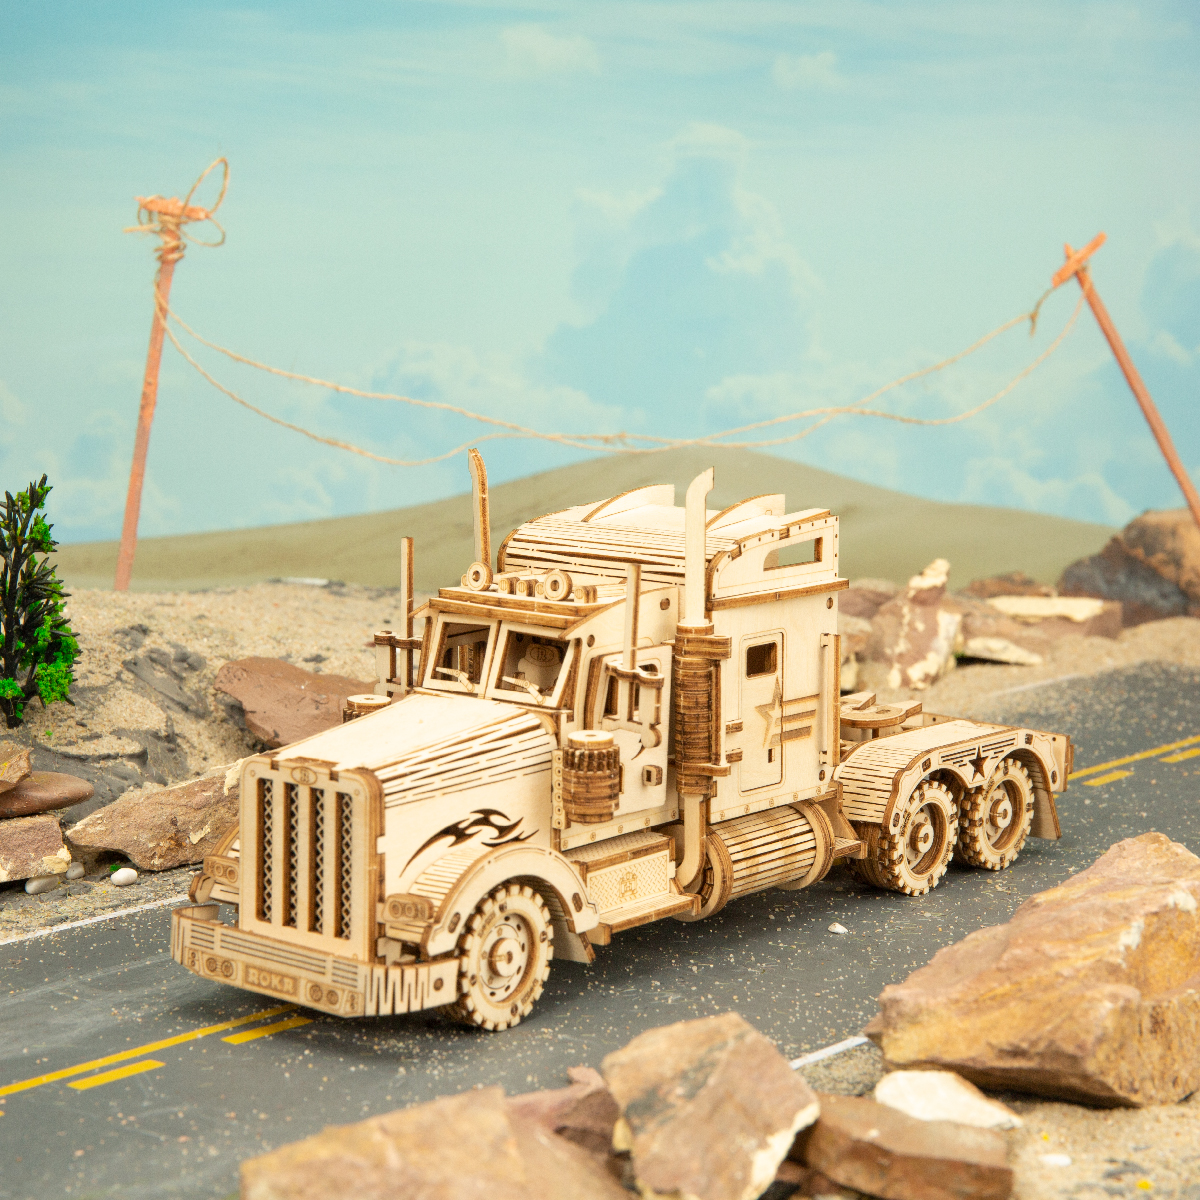 ROKR 3D Puzzle America Heavy Truck Wooden Building Toy Kit